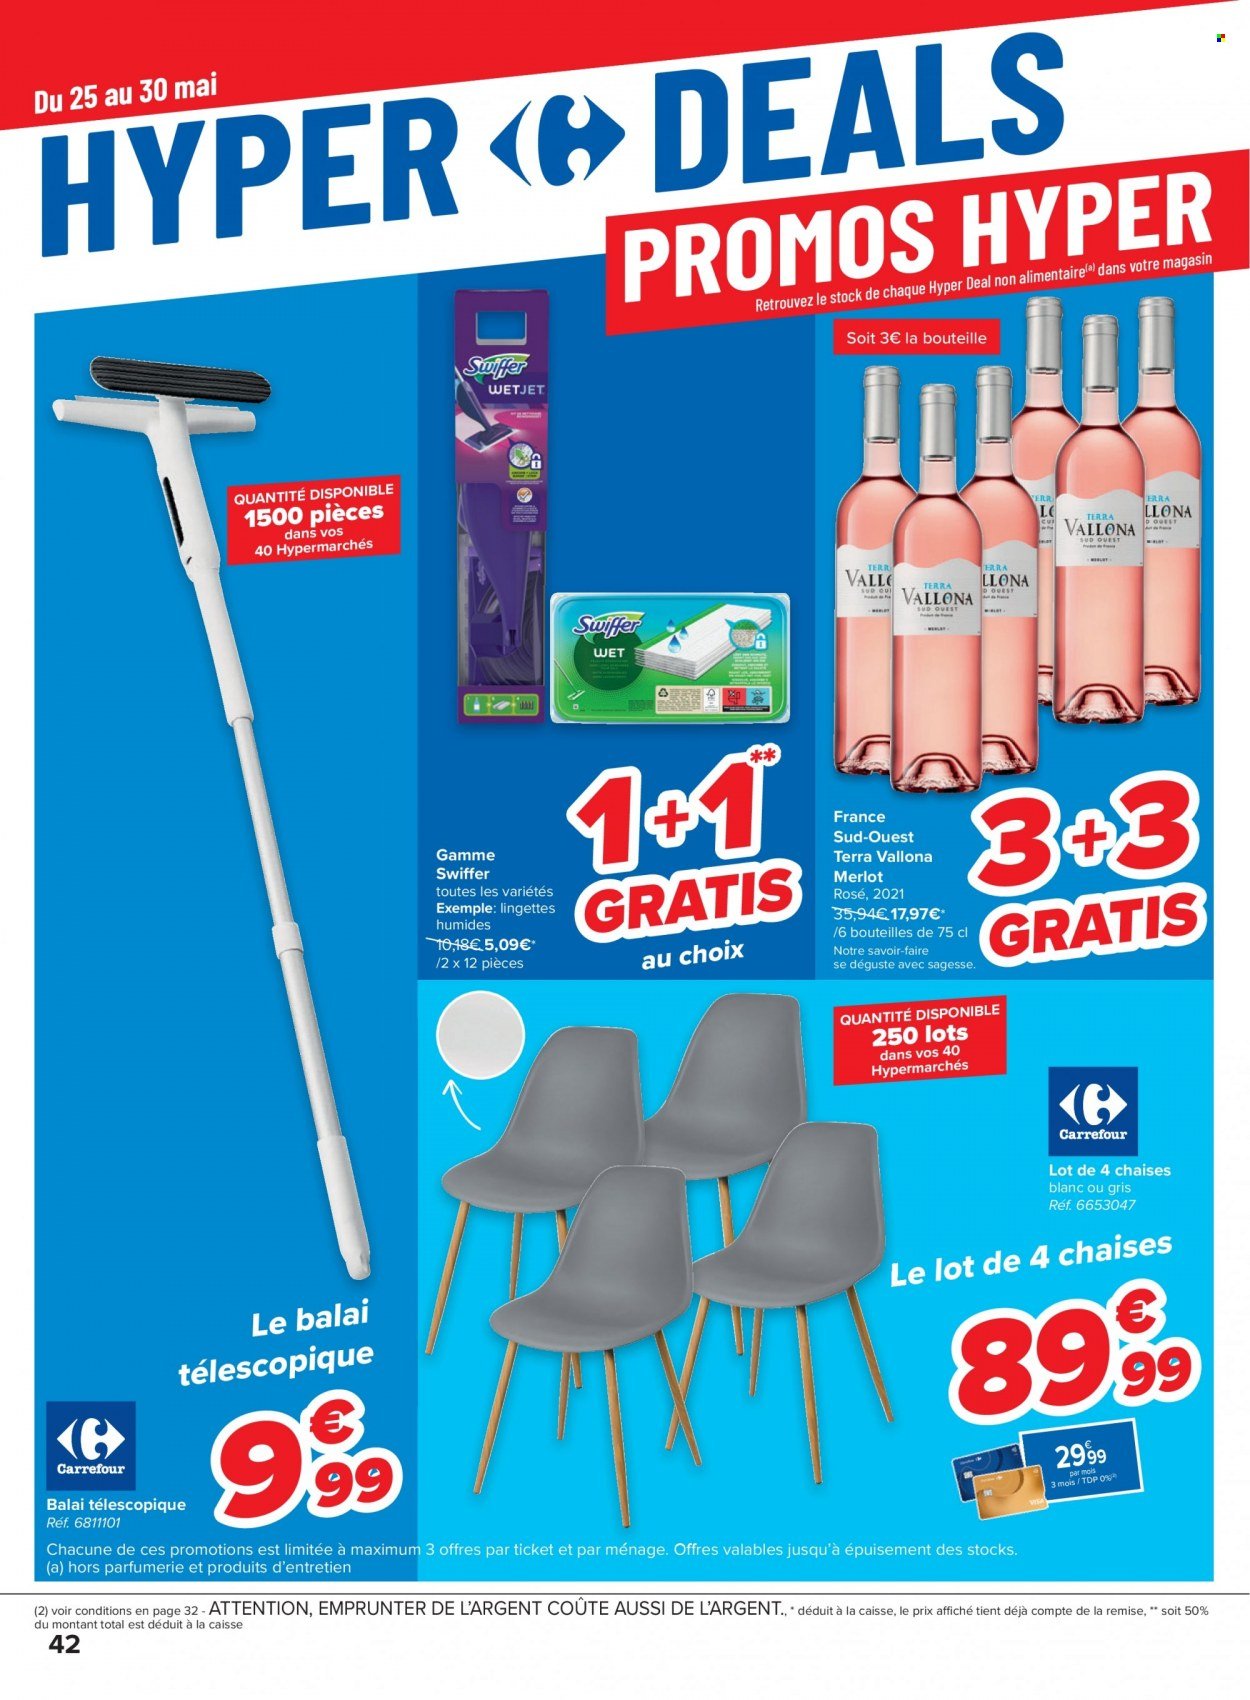 Catalogue Carrefour hypermarkt - 25.5.2022 - 31.5.2022. Page 42.